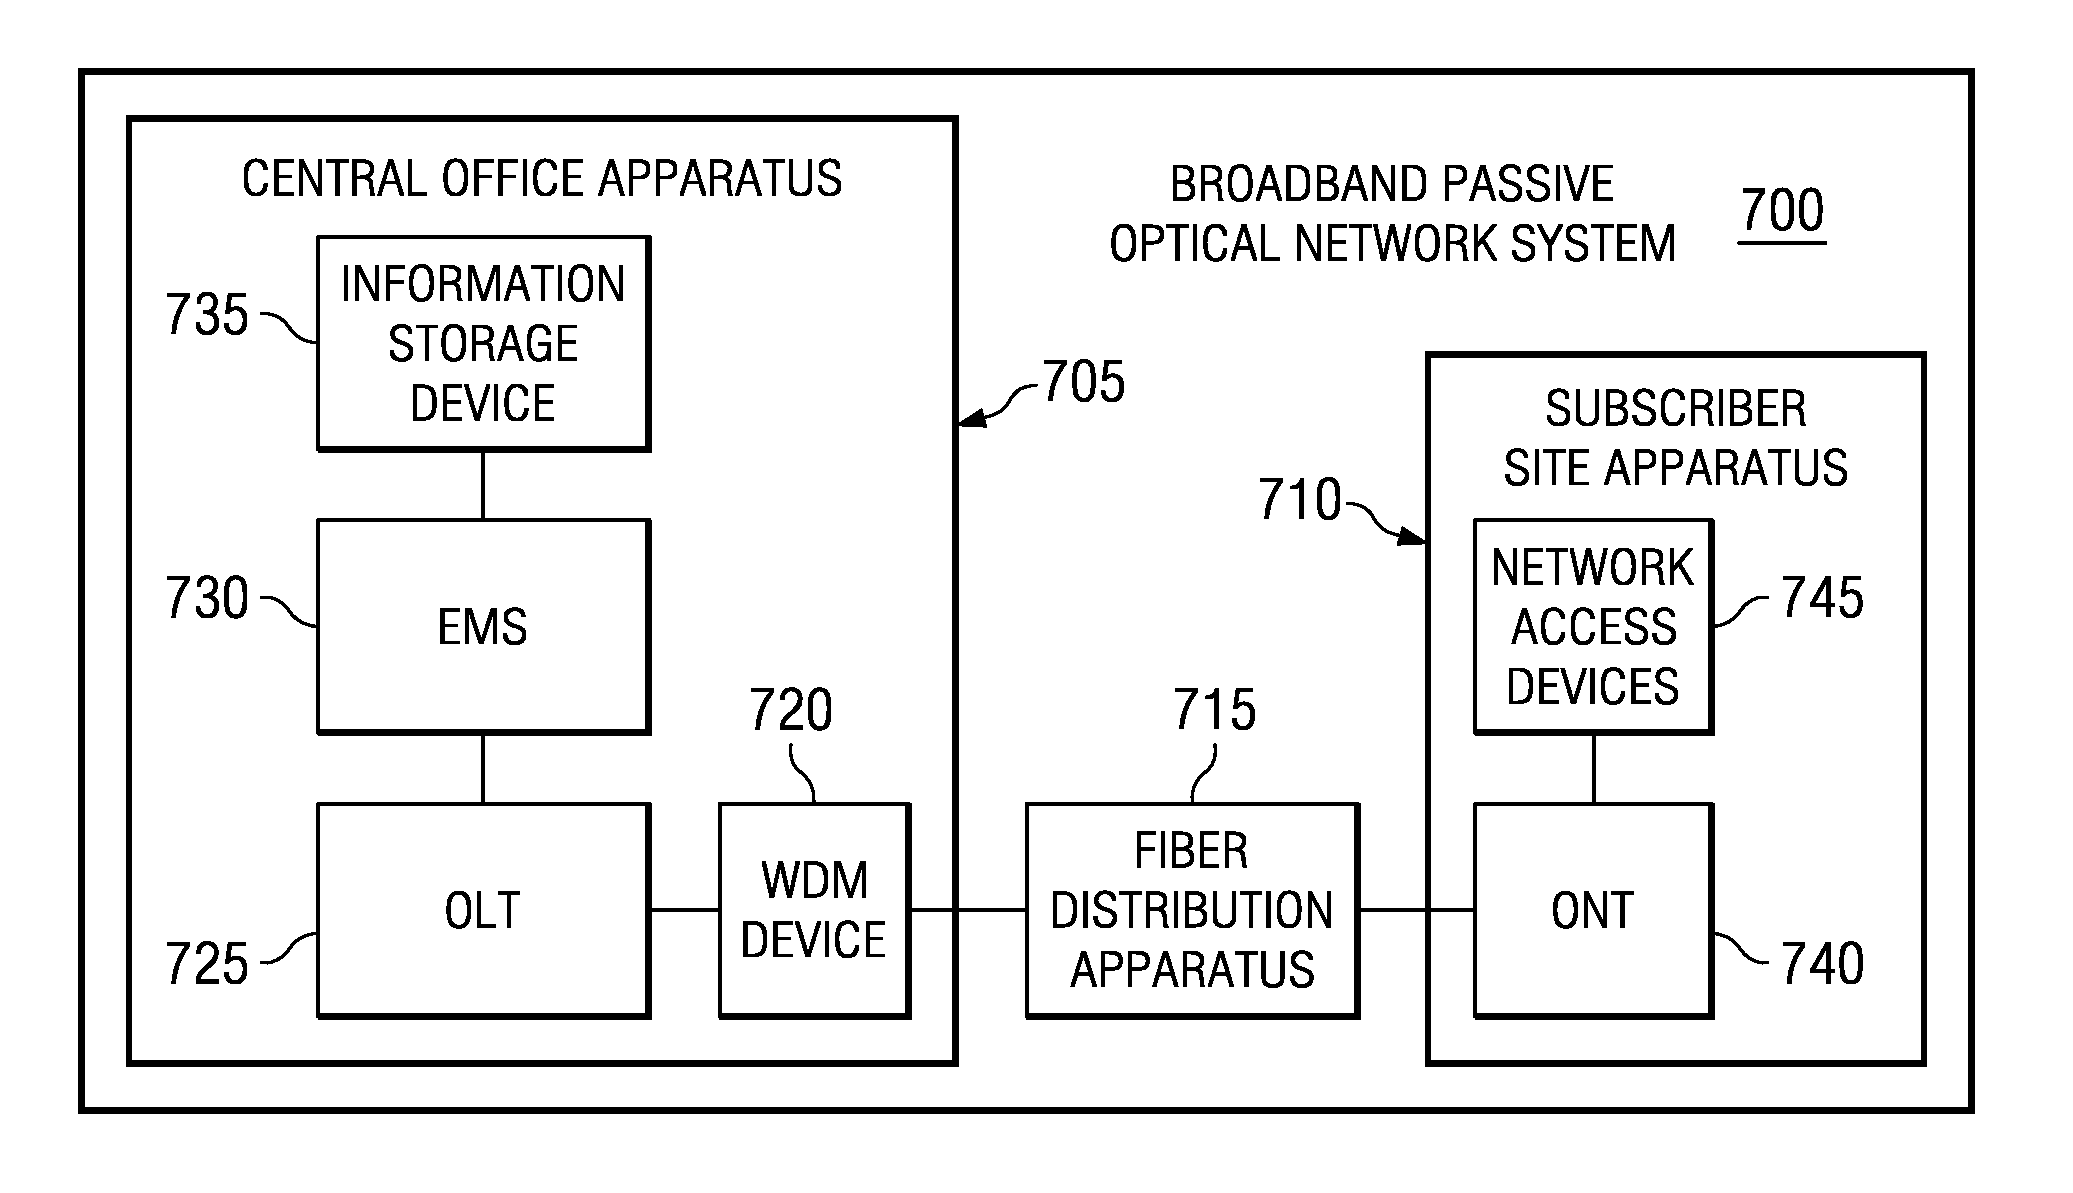 Optical network termination with automatic determination of geographic location